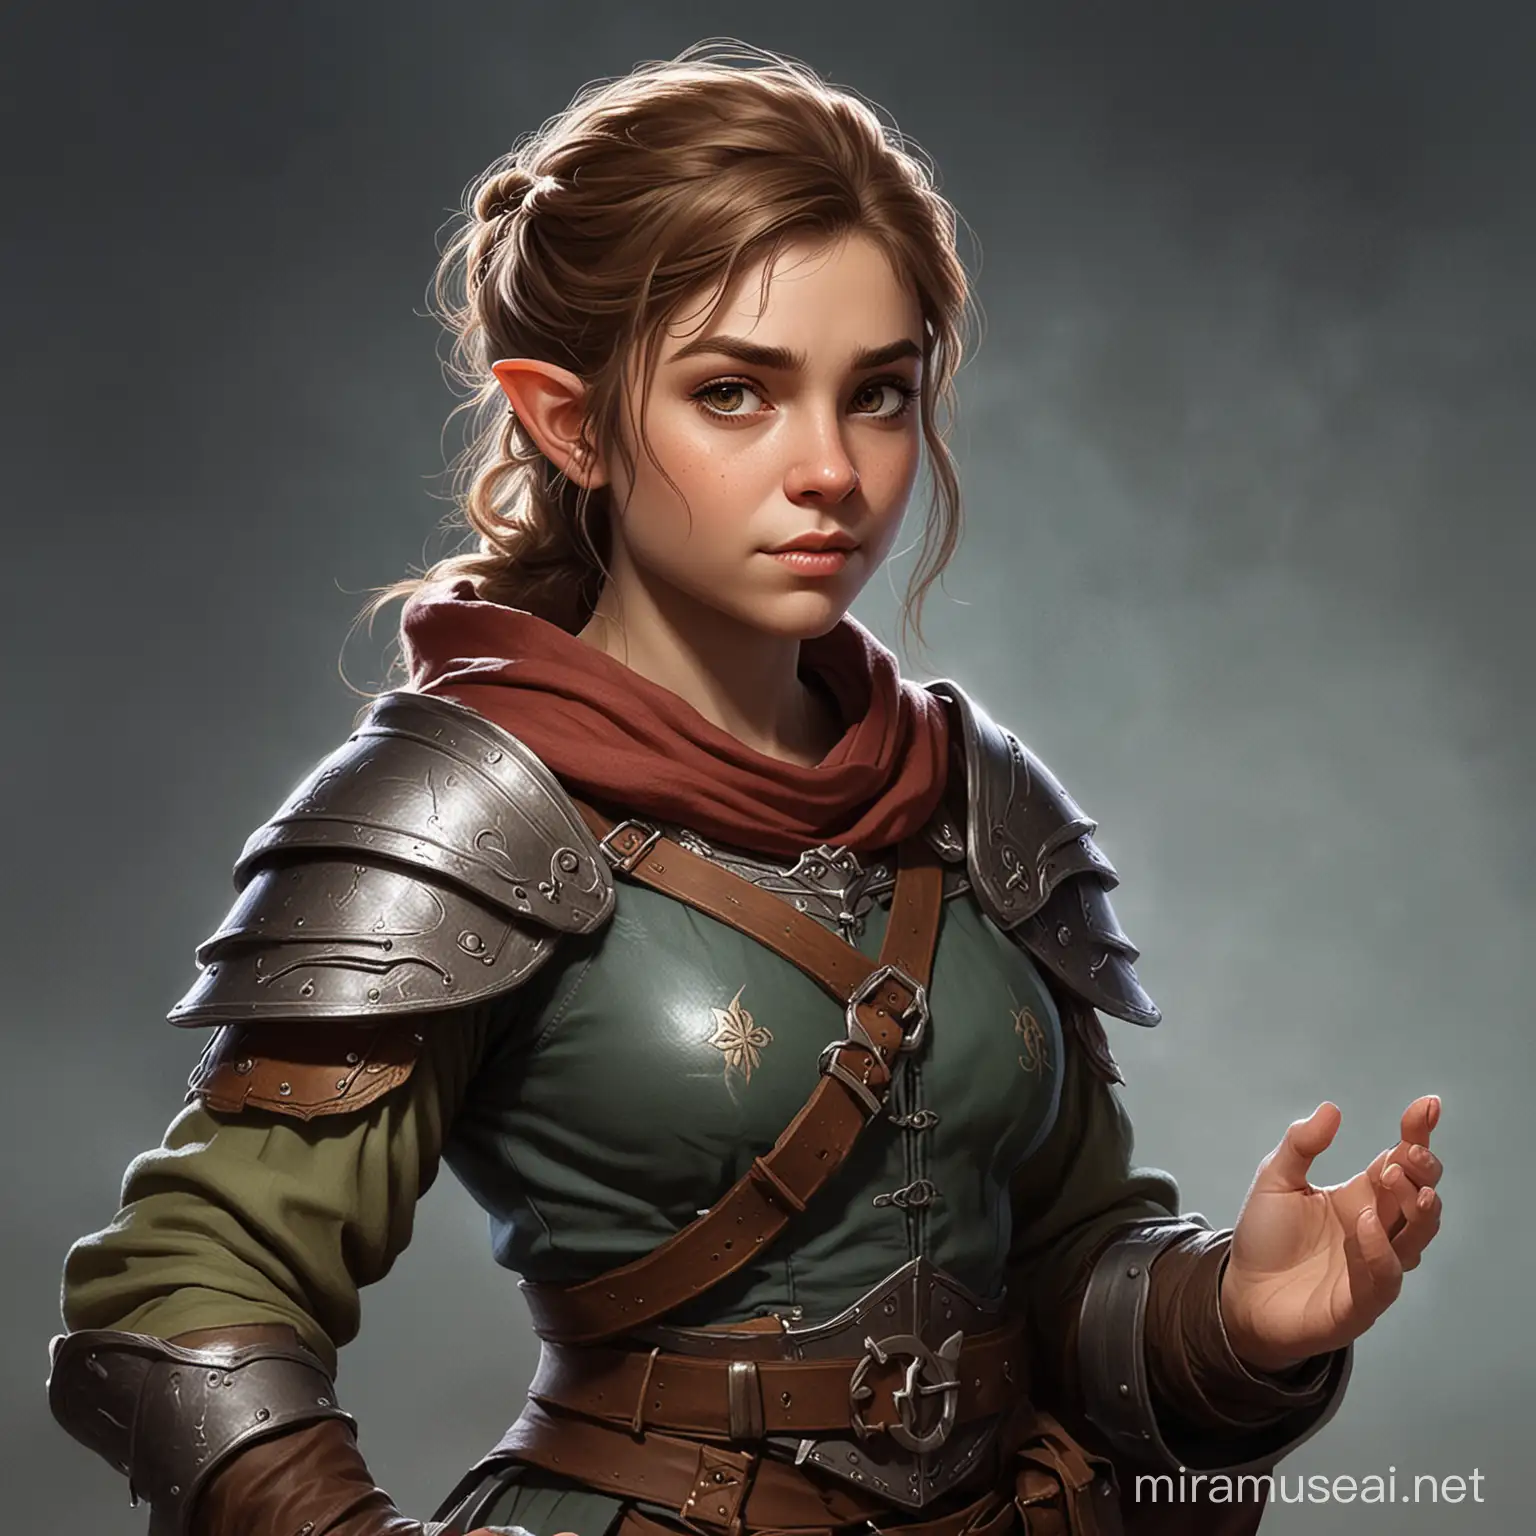 A female halfling who made a pact with an otherworldly being to gain access to magical powers.